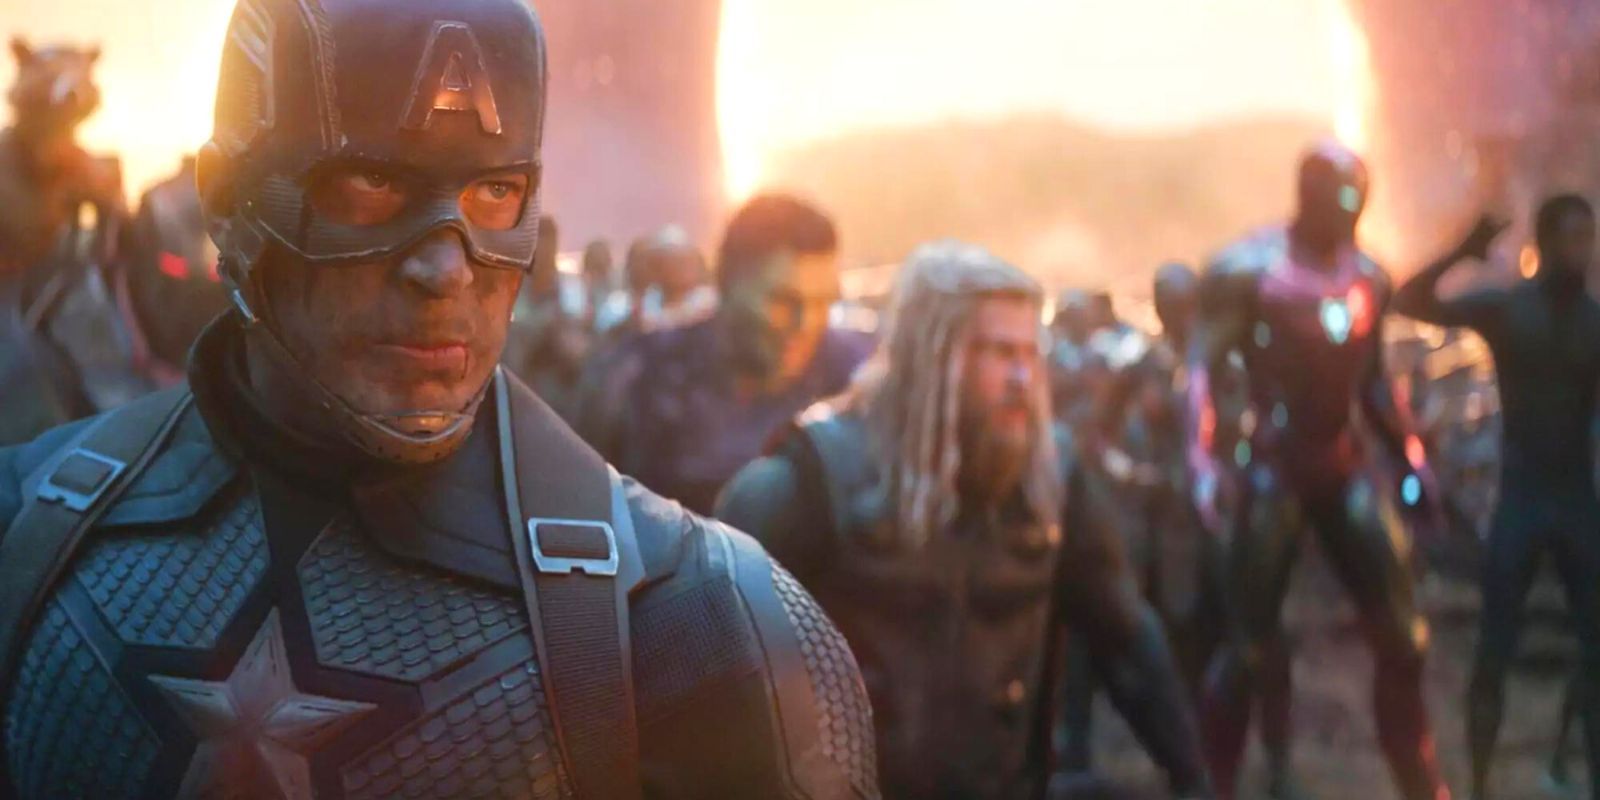 The Avengers line up, ready for the final battle of Endgame with Captain America in the front